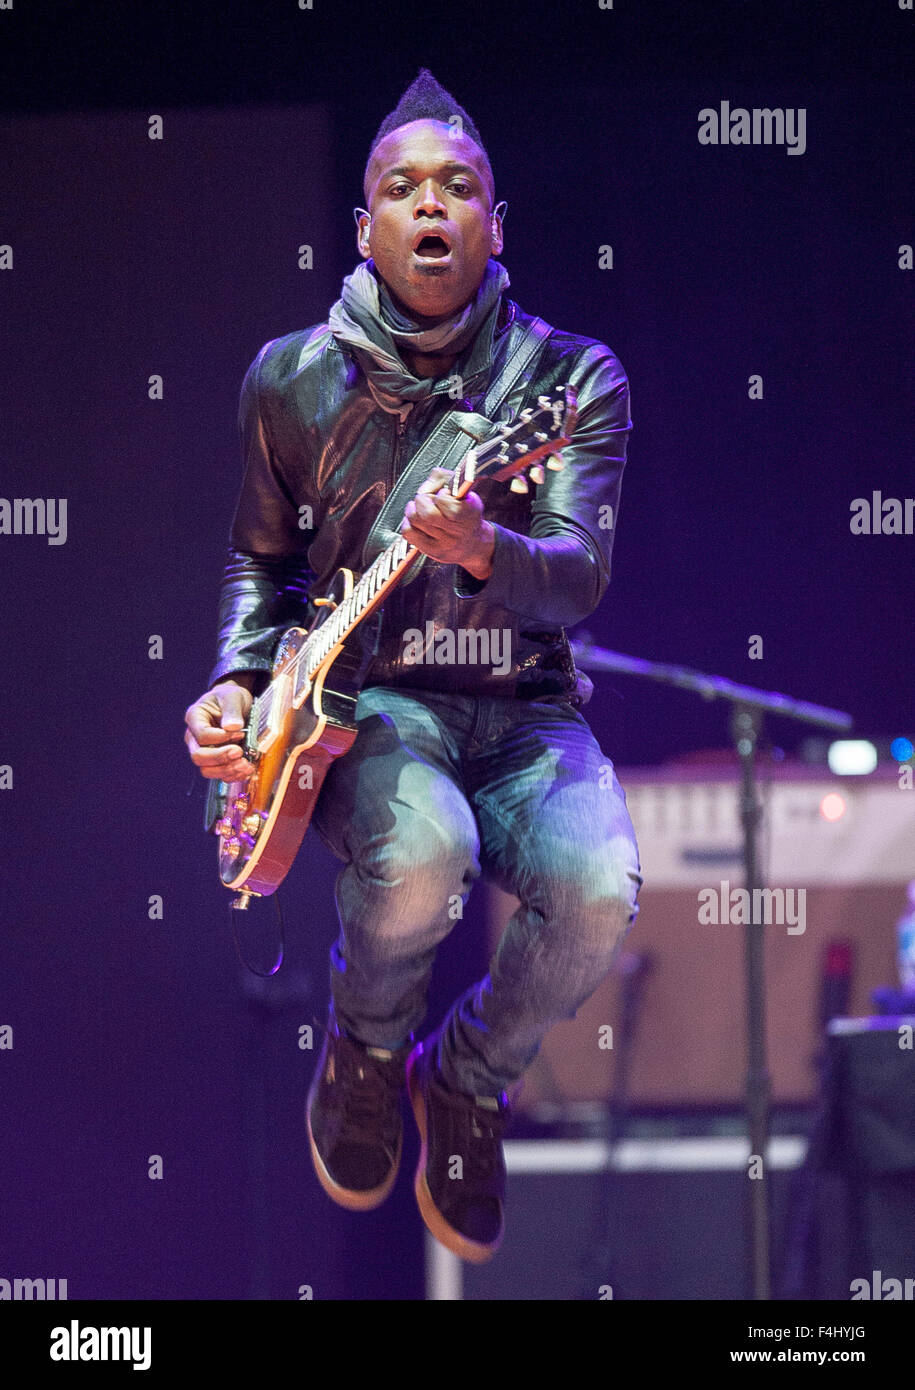 Oct 17, 2015 - Raleigh, North Carolina; USA - Guitarist CAPTAIN KIRK DOUGLAS of the band THE ROOTS performs live as part of the inaugural 2015 American Roots Music and Arts Festival that took place at the Walnut Creek Amphitheatre located in Raleigh. Copyright 2015 Jason Moore. © Jason Moore/ZUMA Wire/Alamy Live News Stock Photo